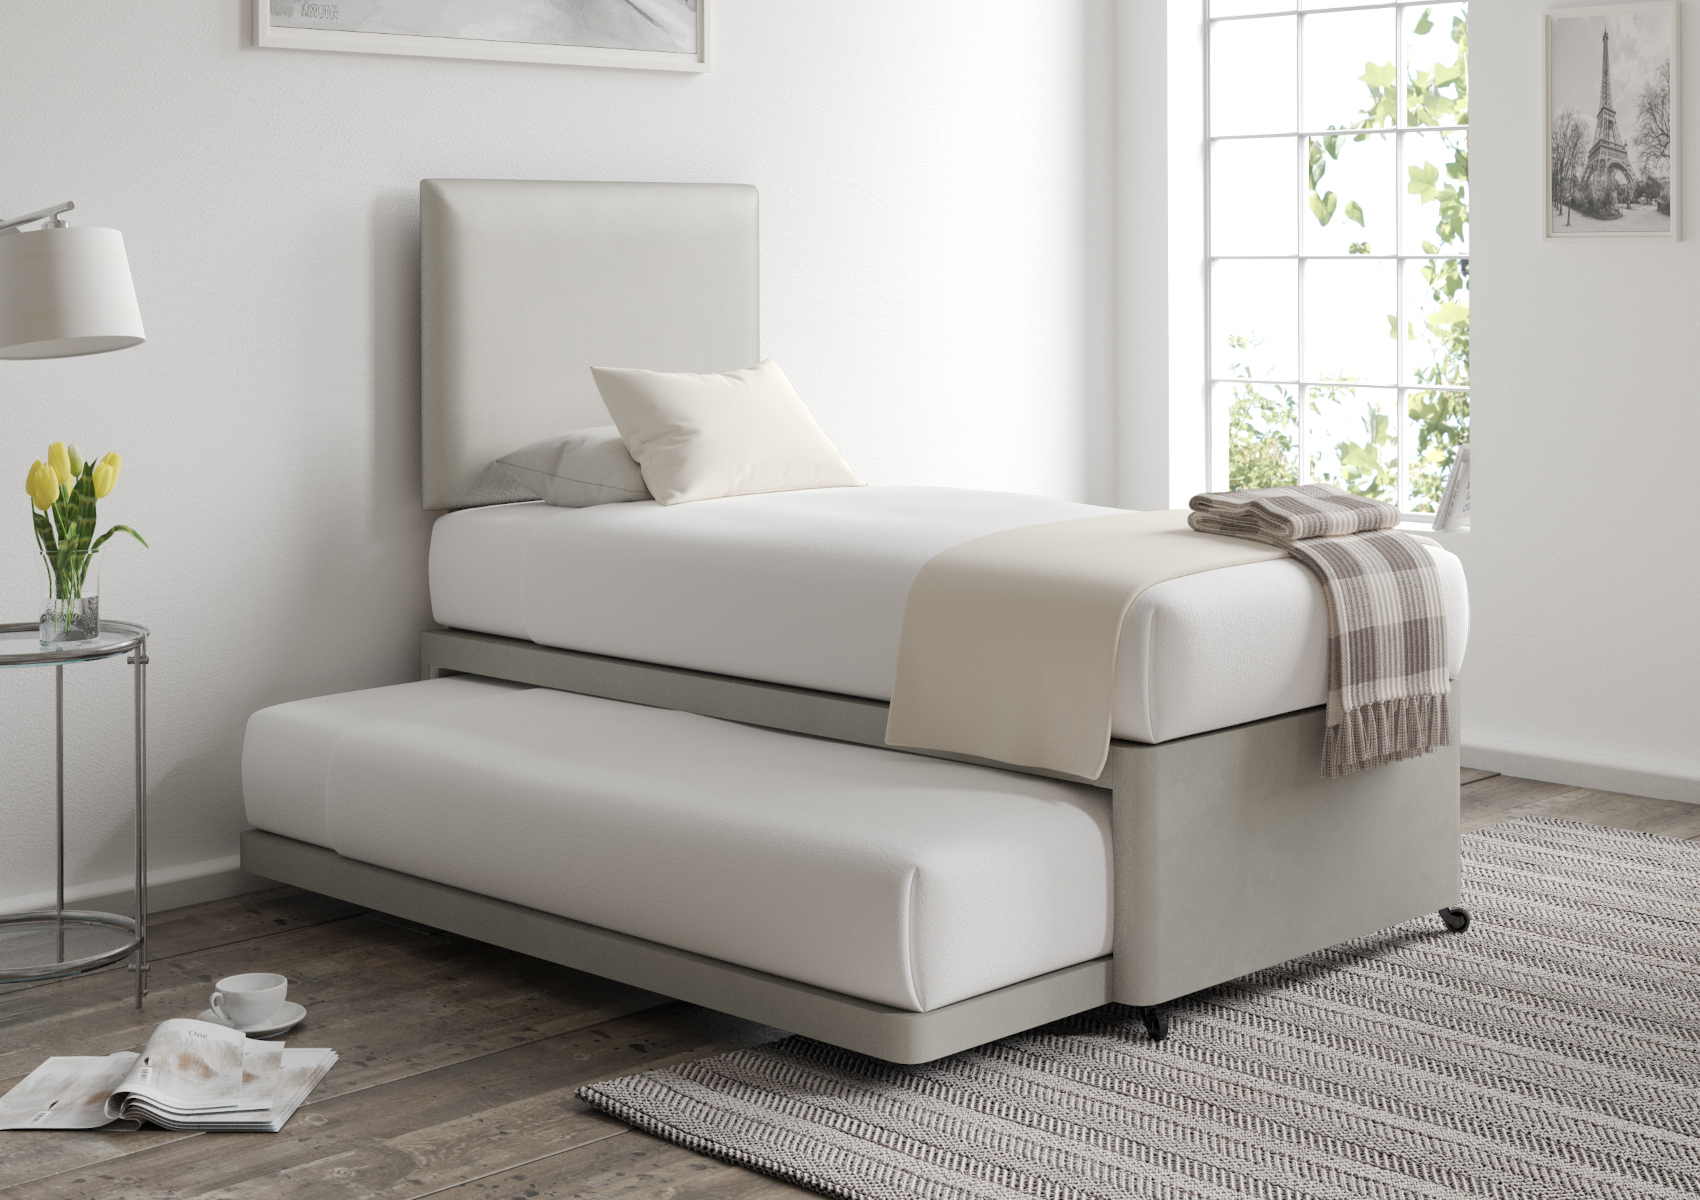 View Cheltenham Malia Silver Upholstered Guest Bed With Mattresses Time4Sleep information